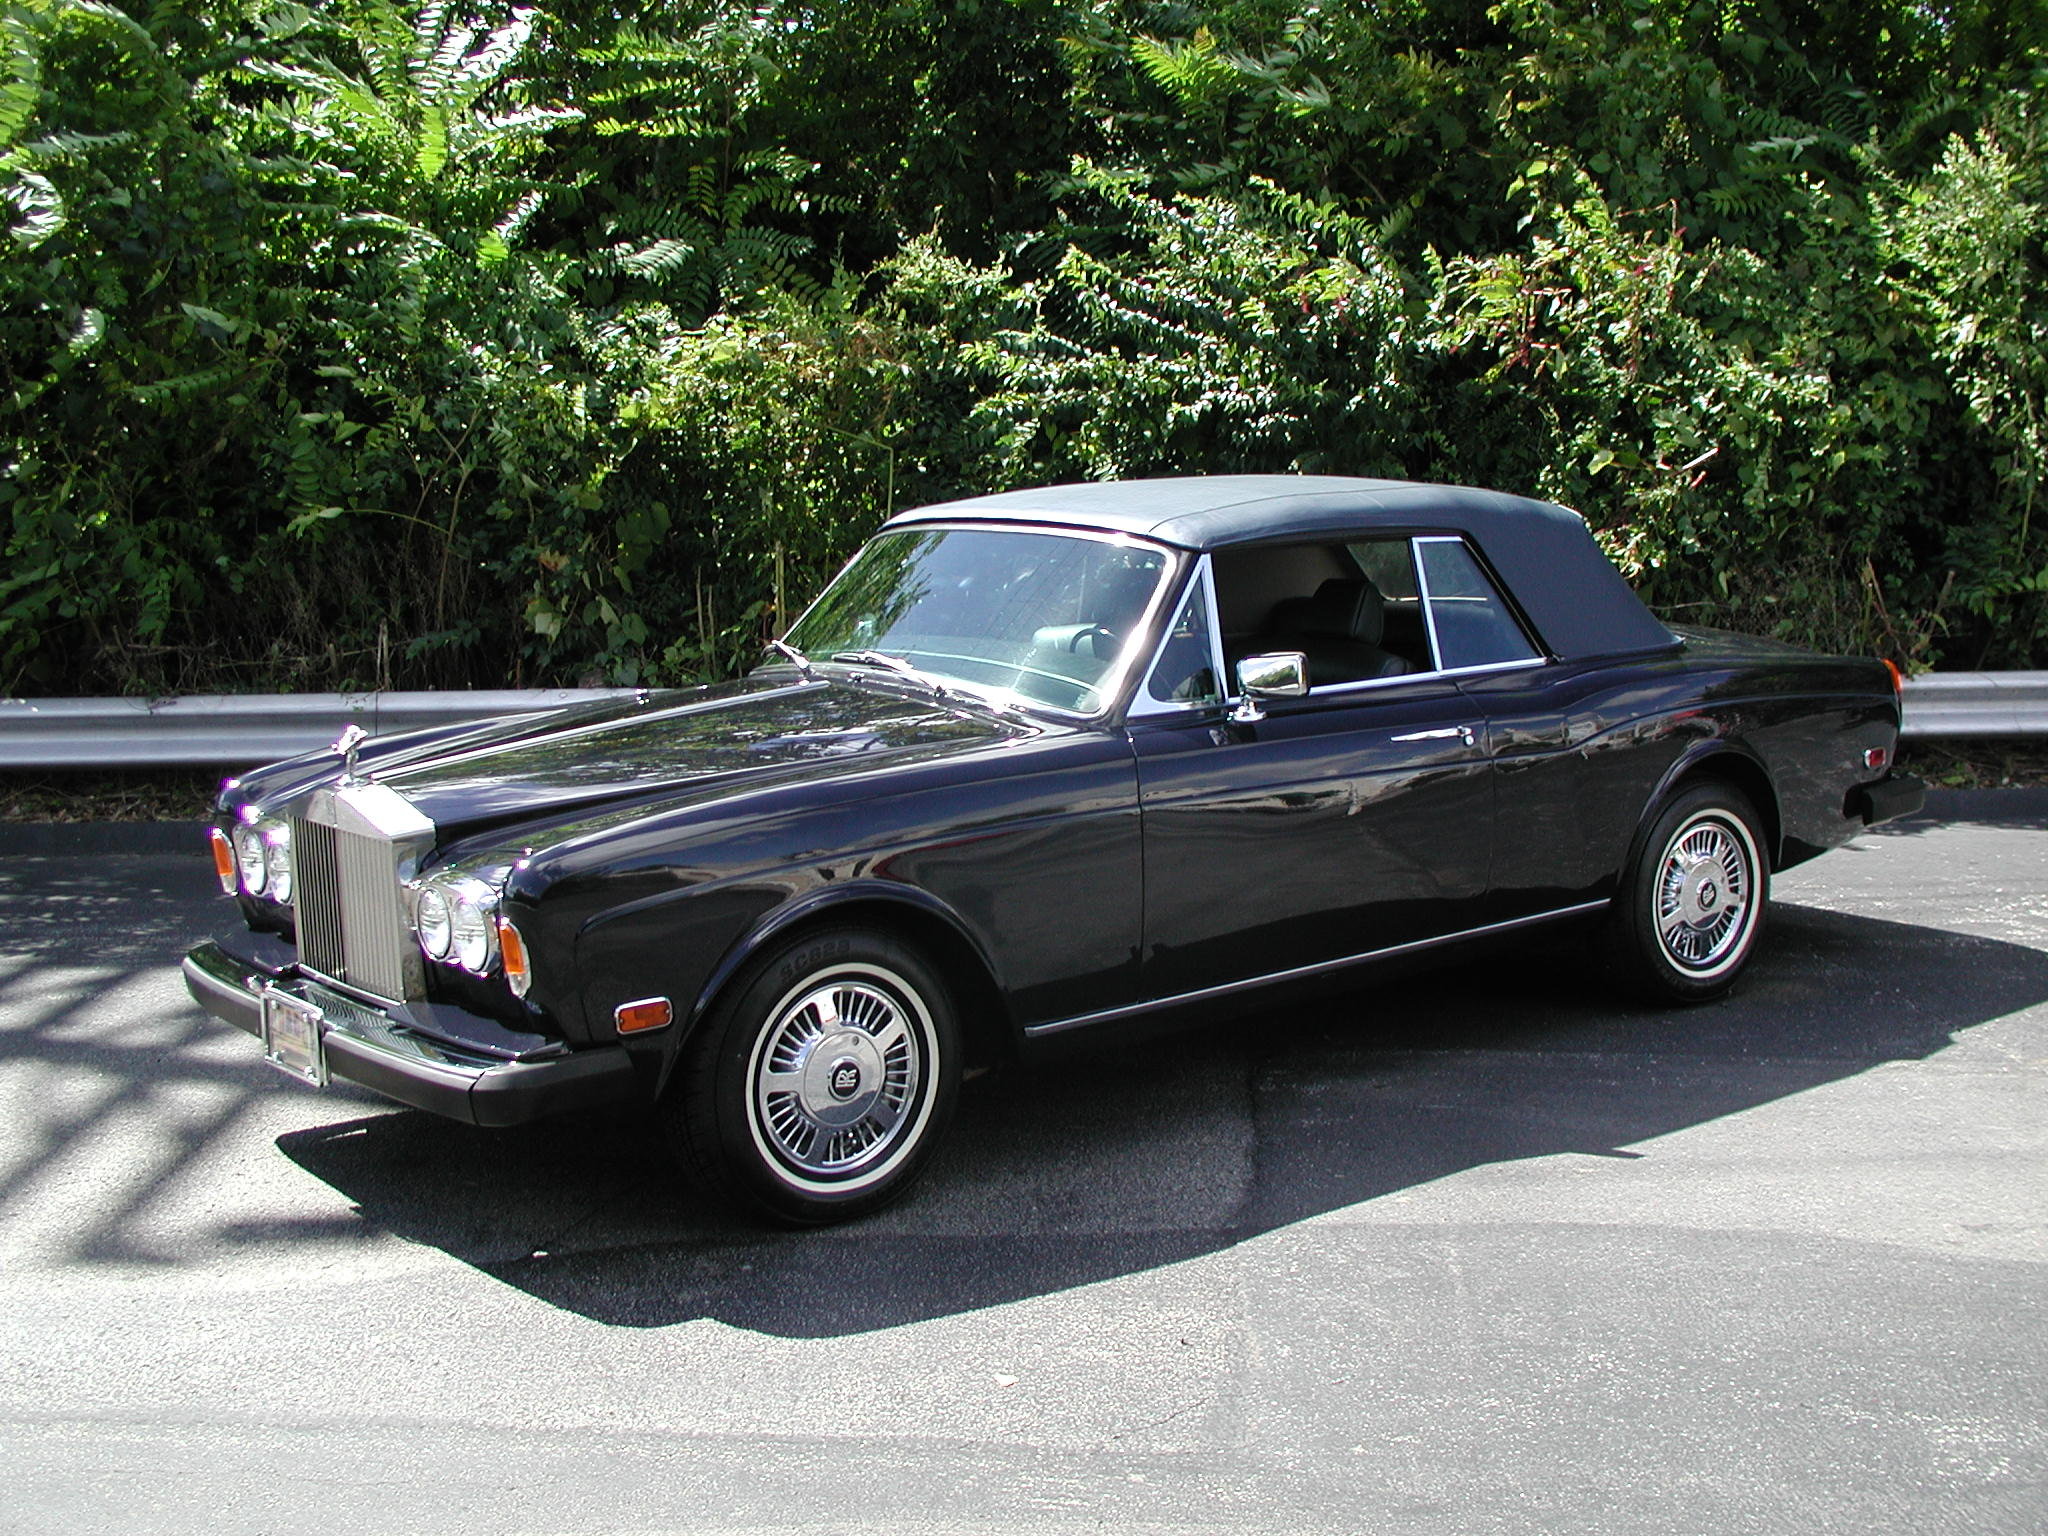 Bonhams  Only one owner and 22000 miles from new1975 RollsRoyce Corniche  Convertible Engine no 19178